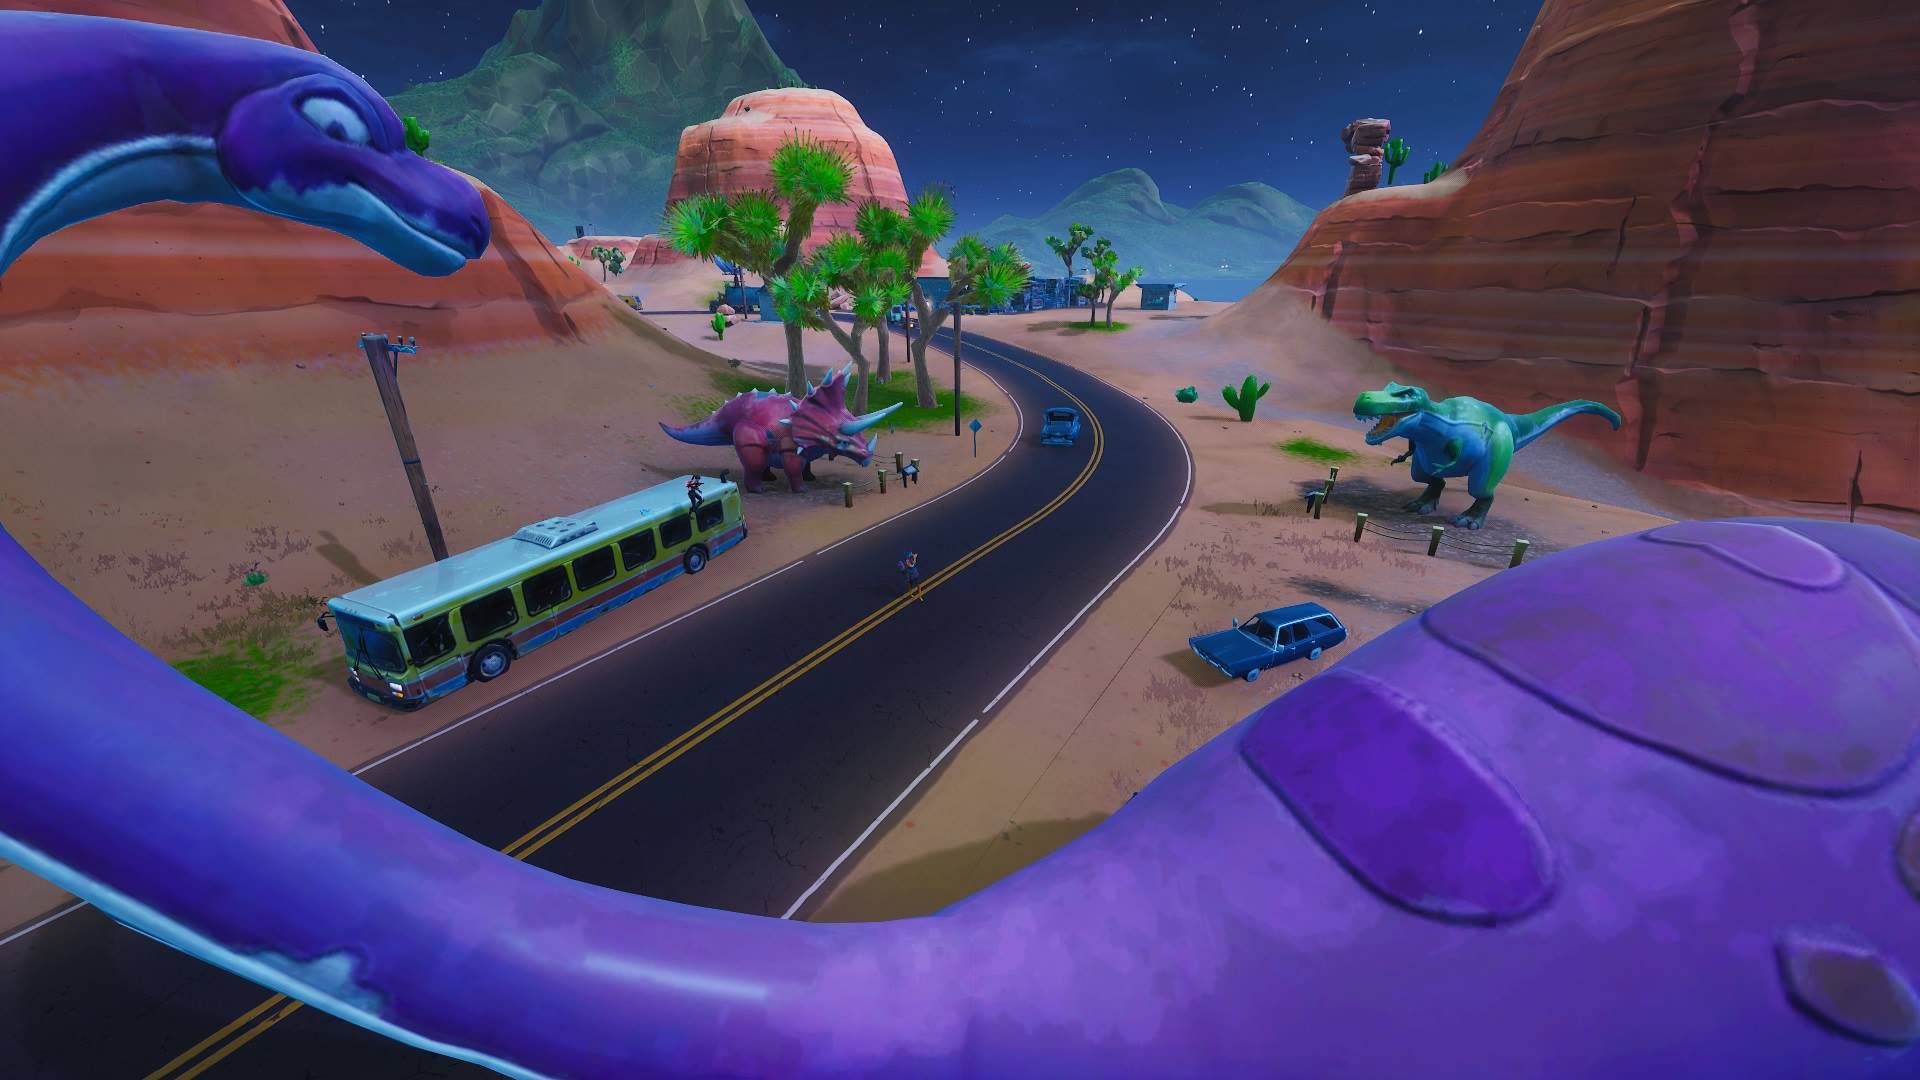 fortnite dance between ice sculptures dinosaurs hot springs locations inverse - where are the three dinosaurs in fortnite season 8